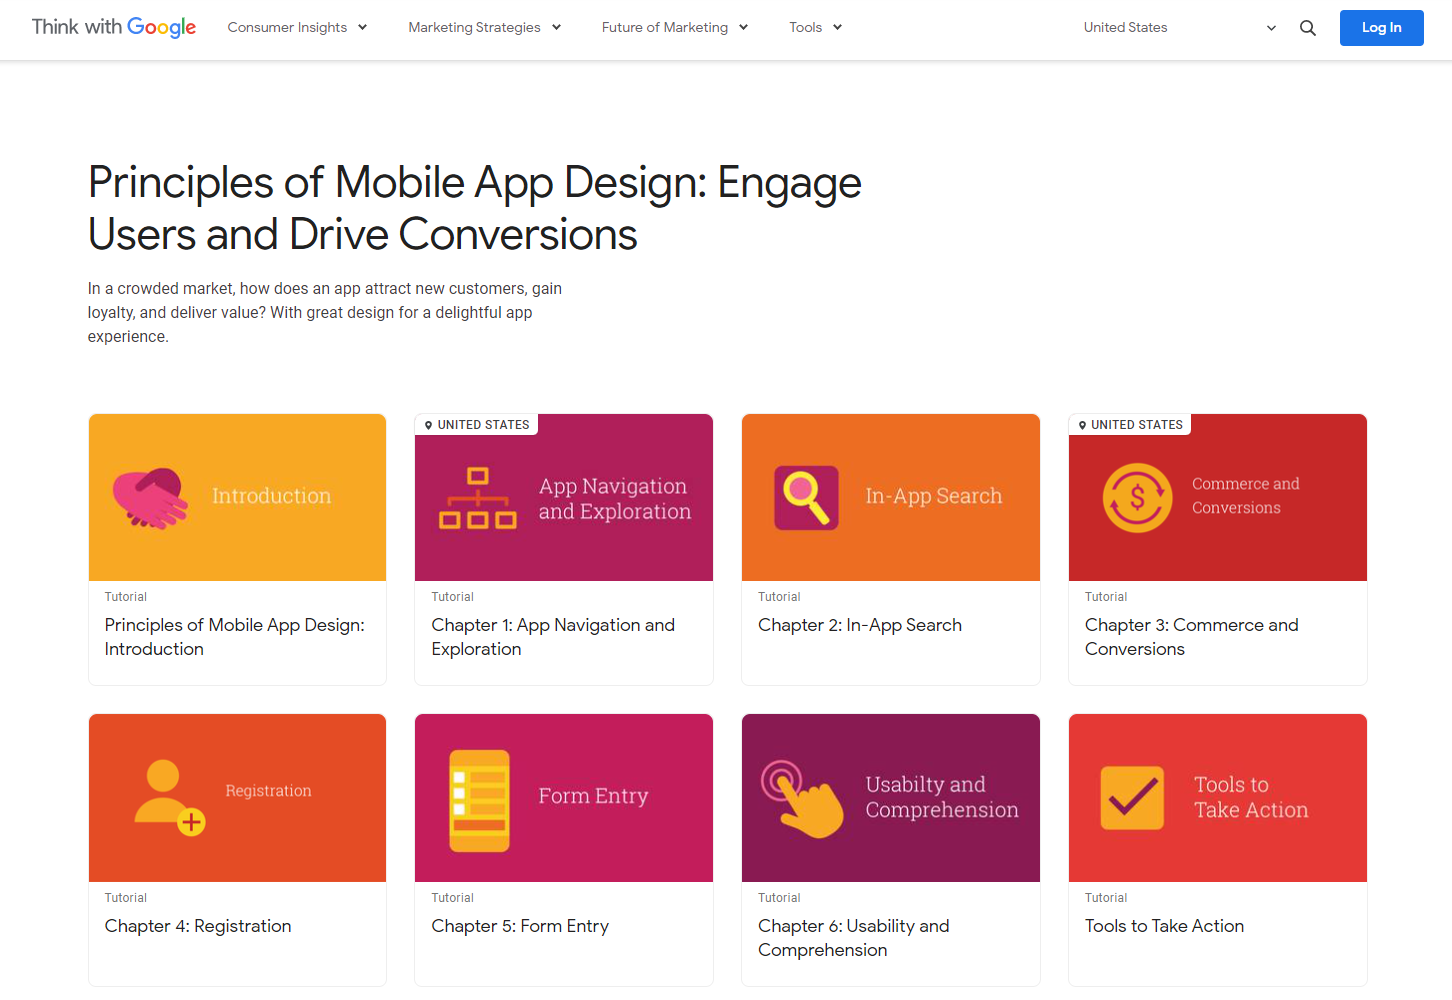 Principles of Mobile App Design: Engage Users and Drive Conversions